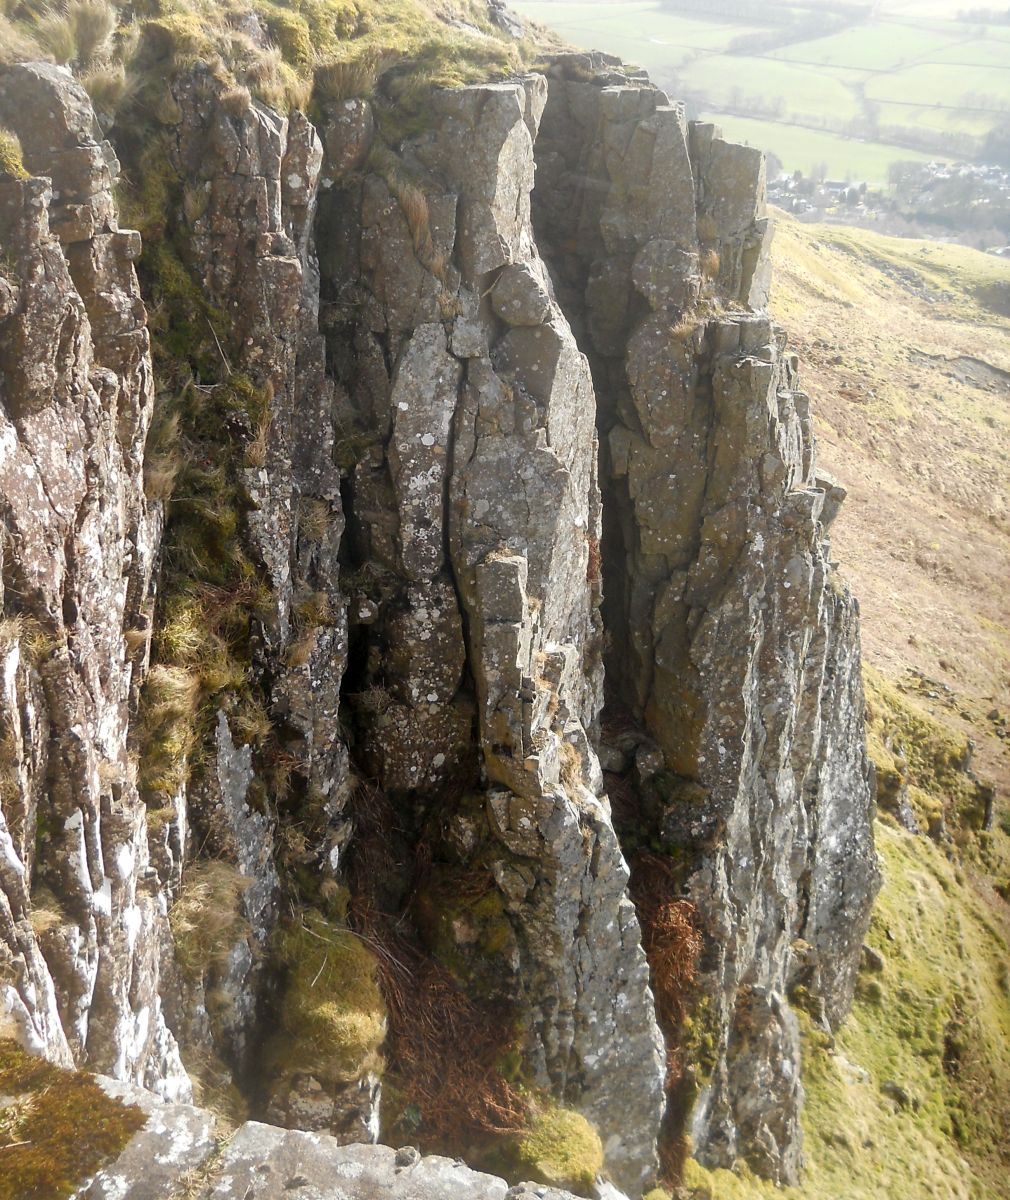 Rock Buttresses at Jenny's Lum in the escarpment of the Campsie Fells